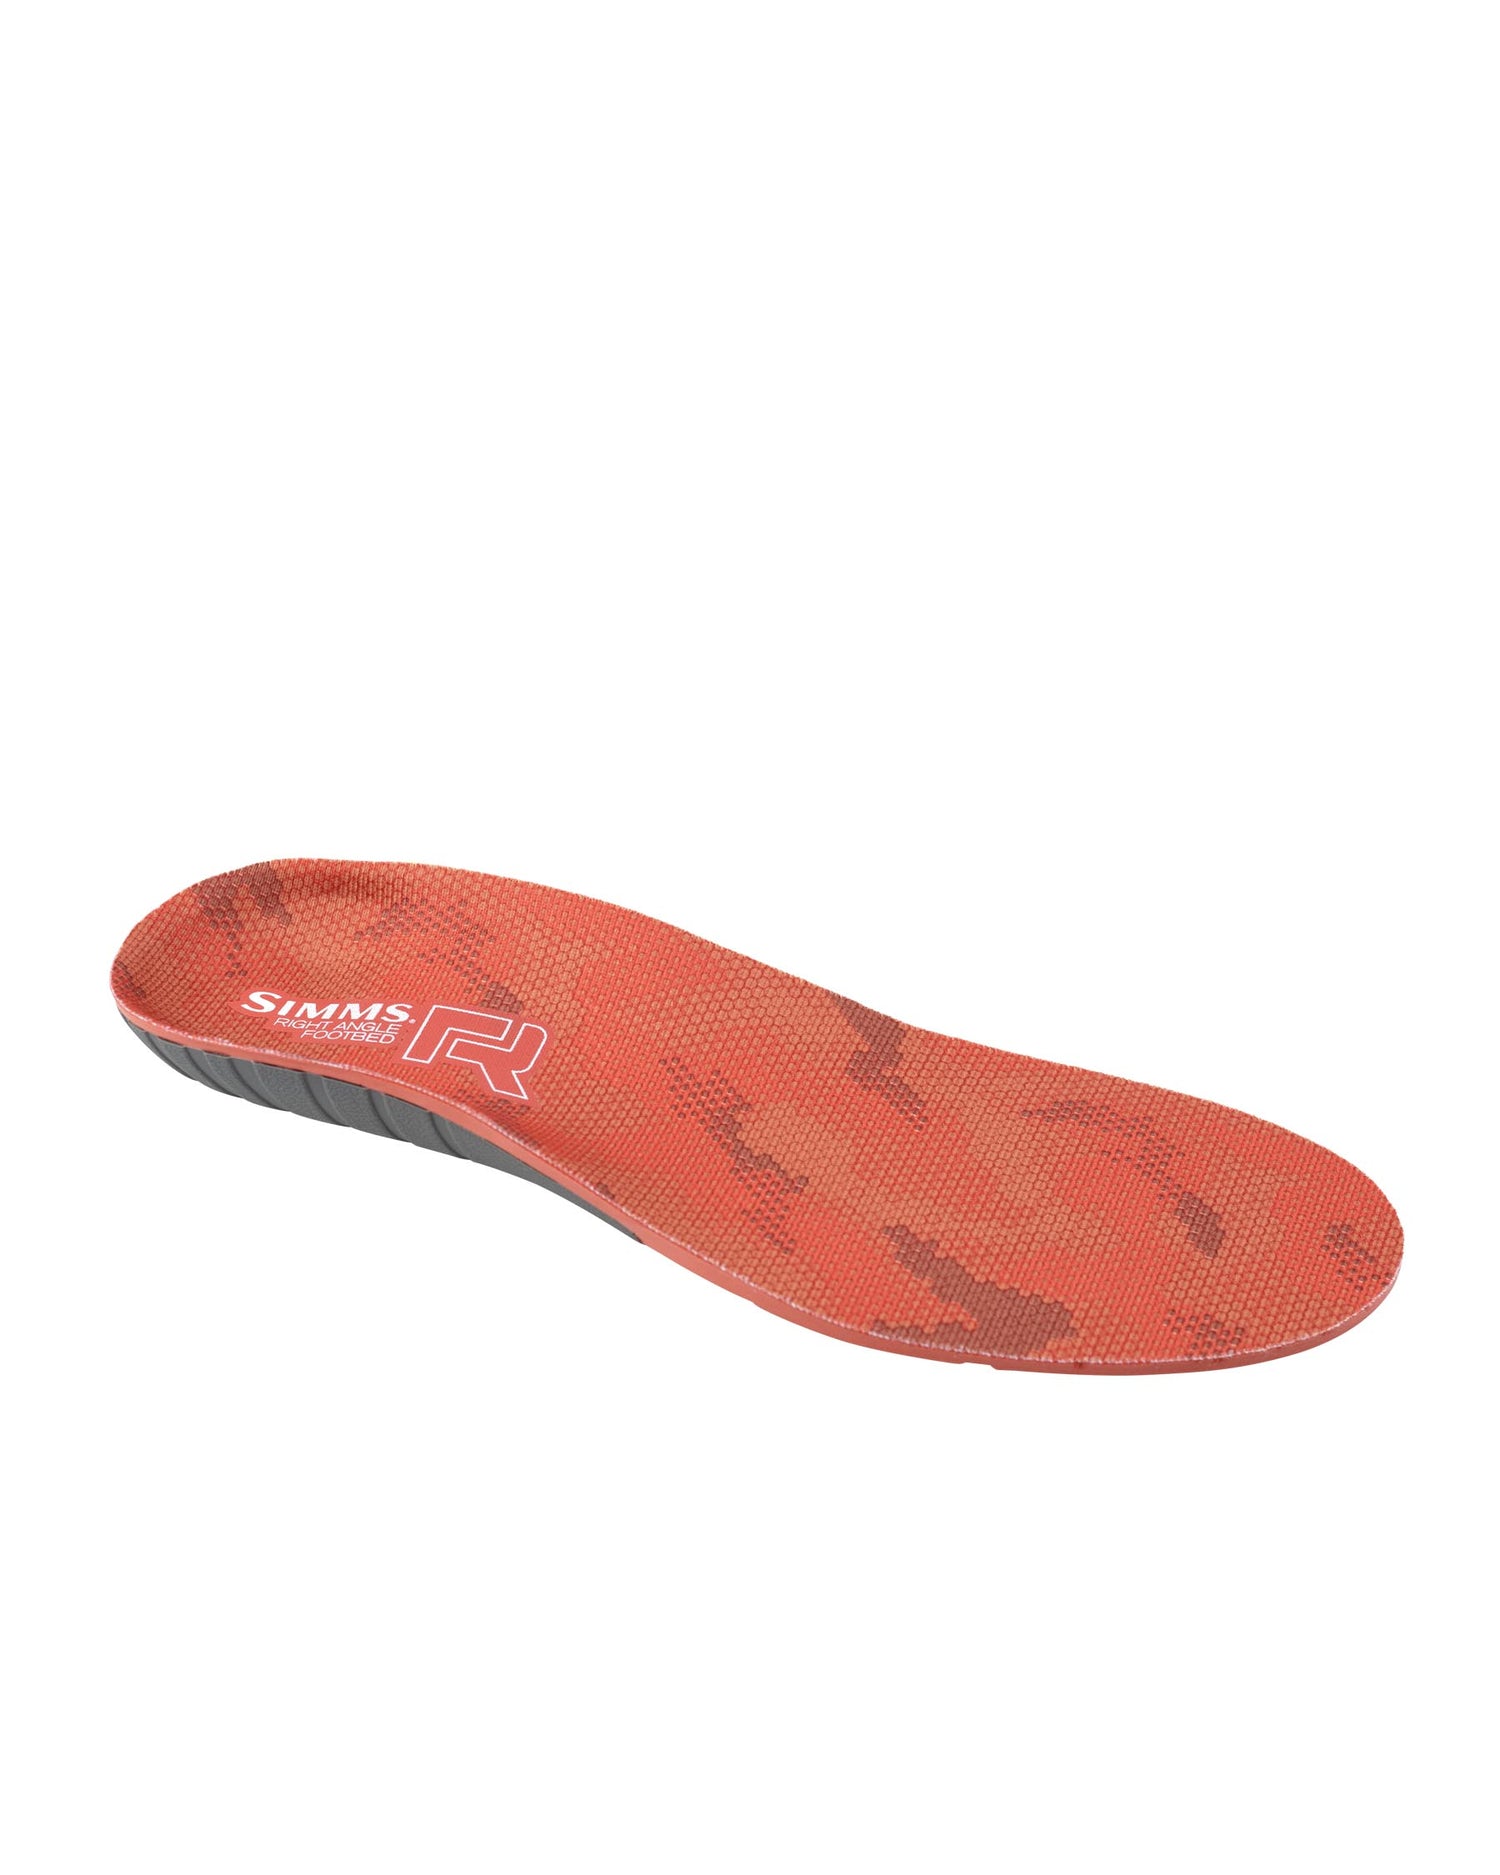 Right Angle Plus Replacement Footbed - Simms Orange